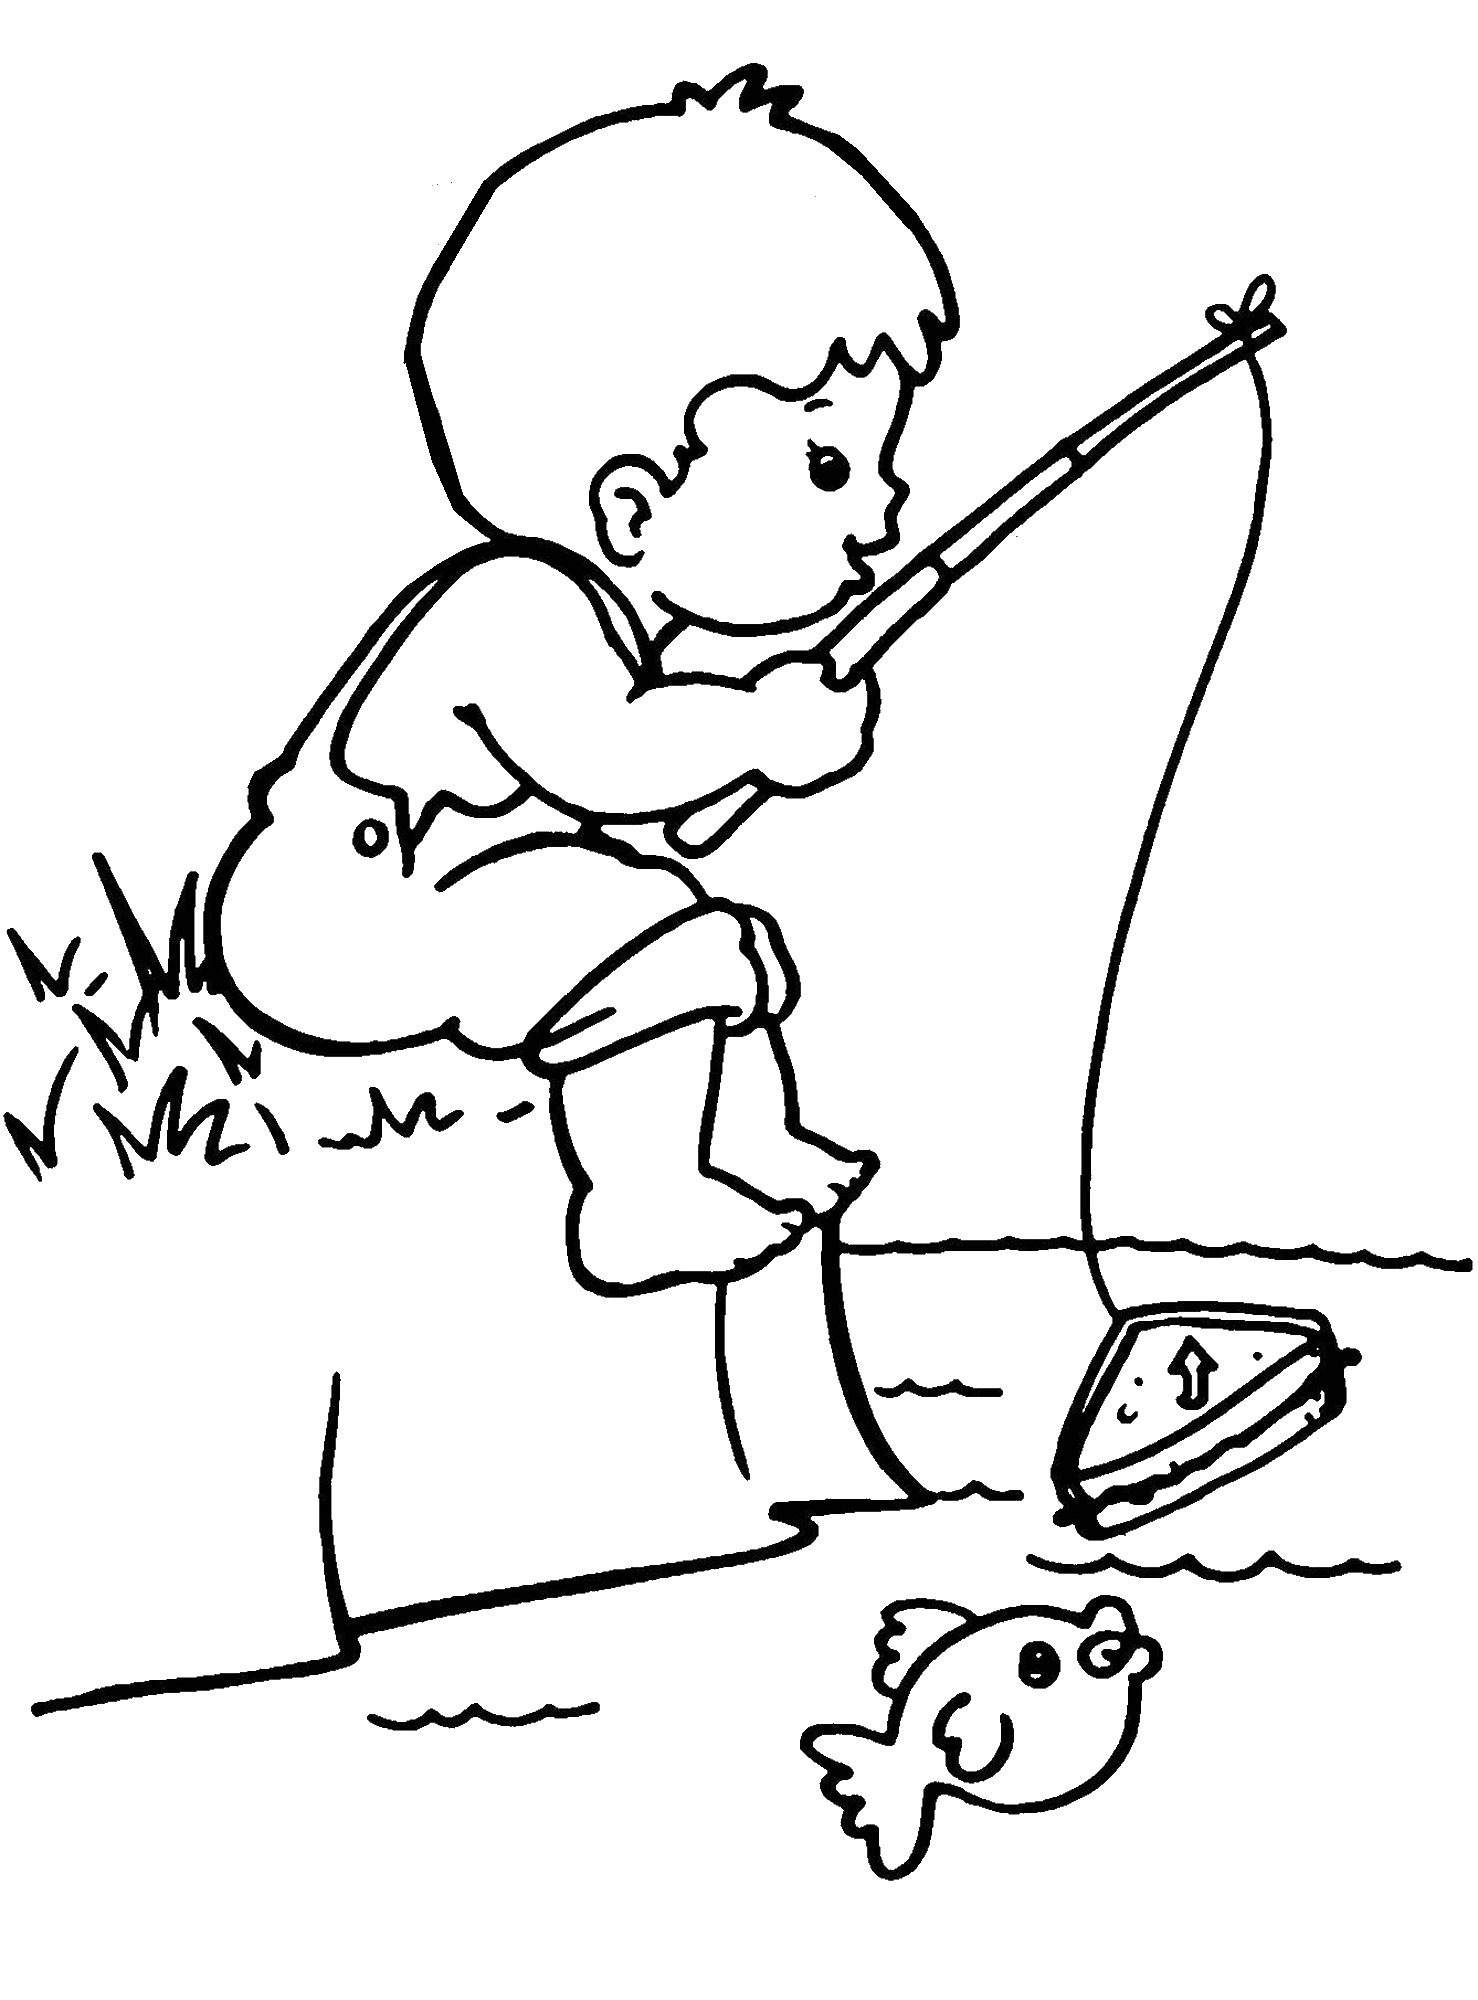 Moses clipart coloring page. Fisherman boy google search